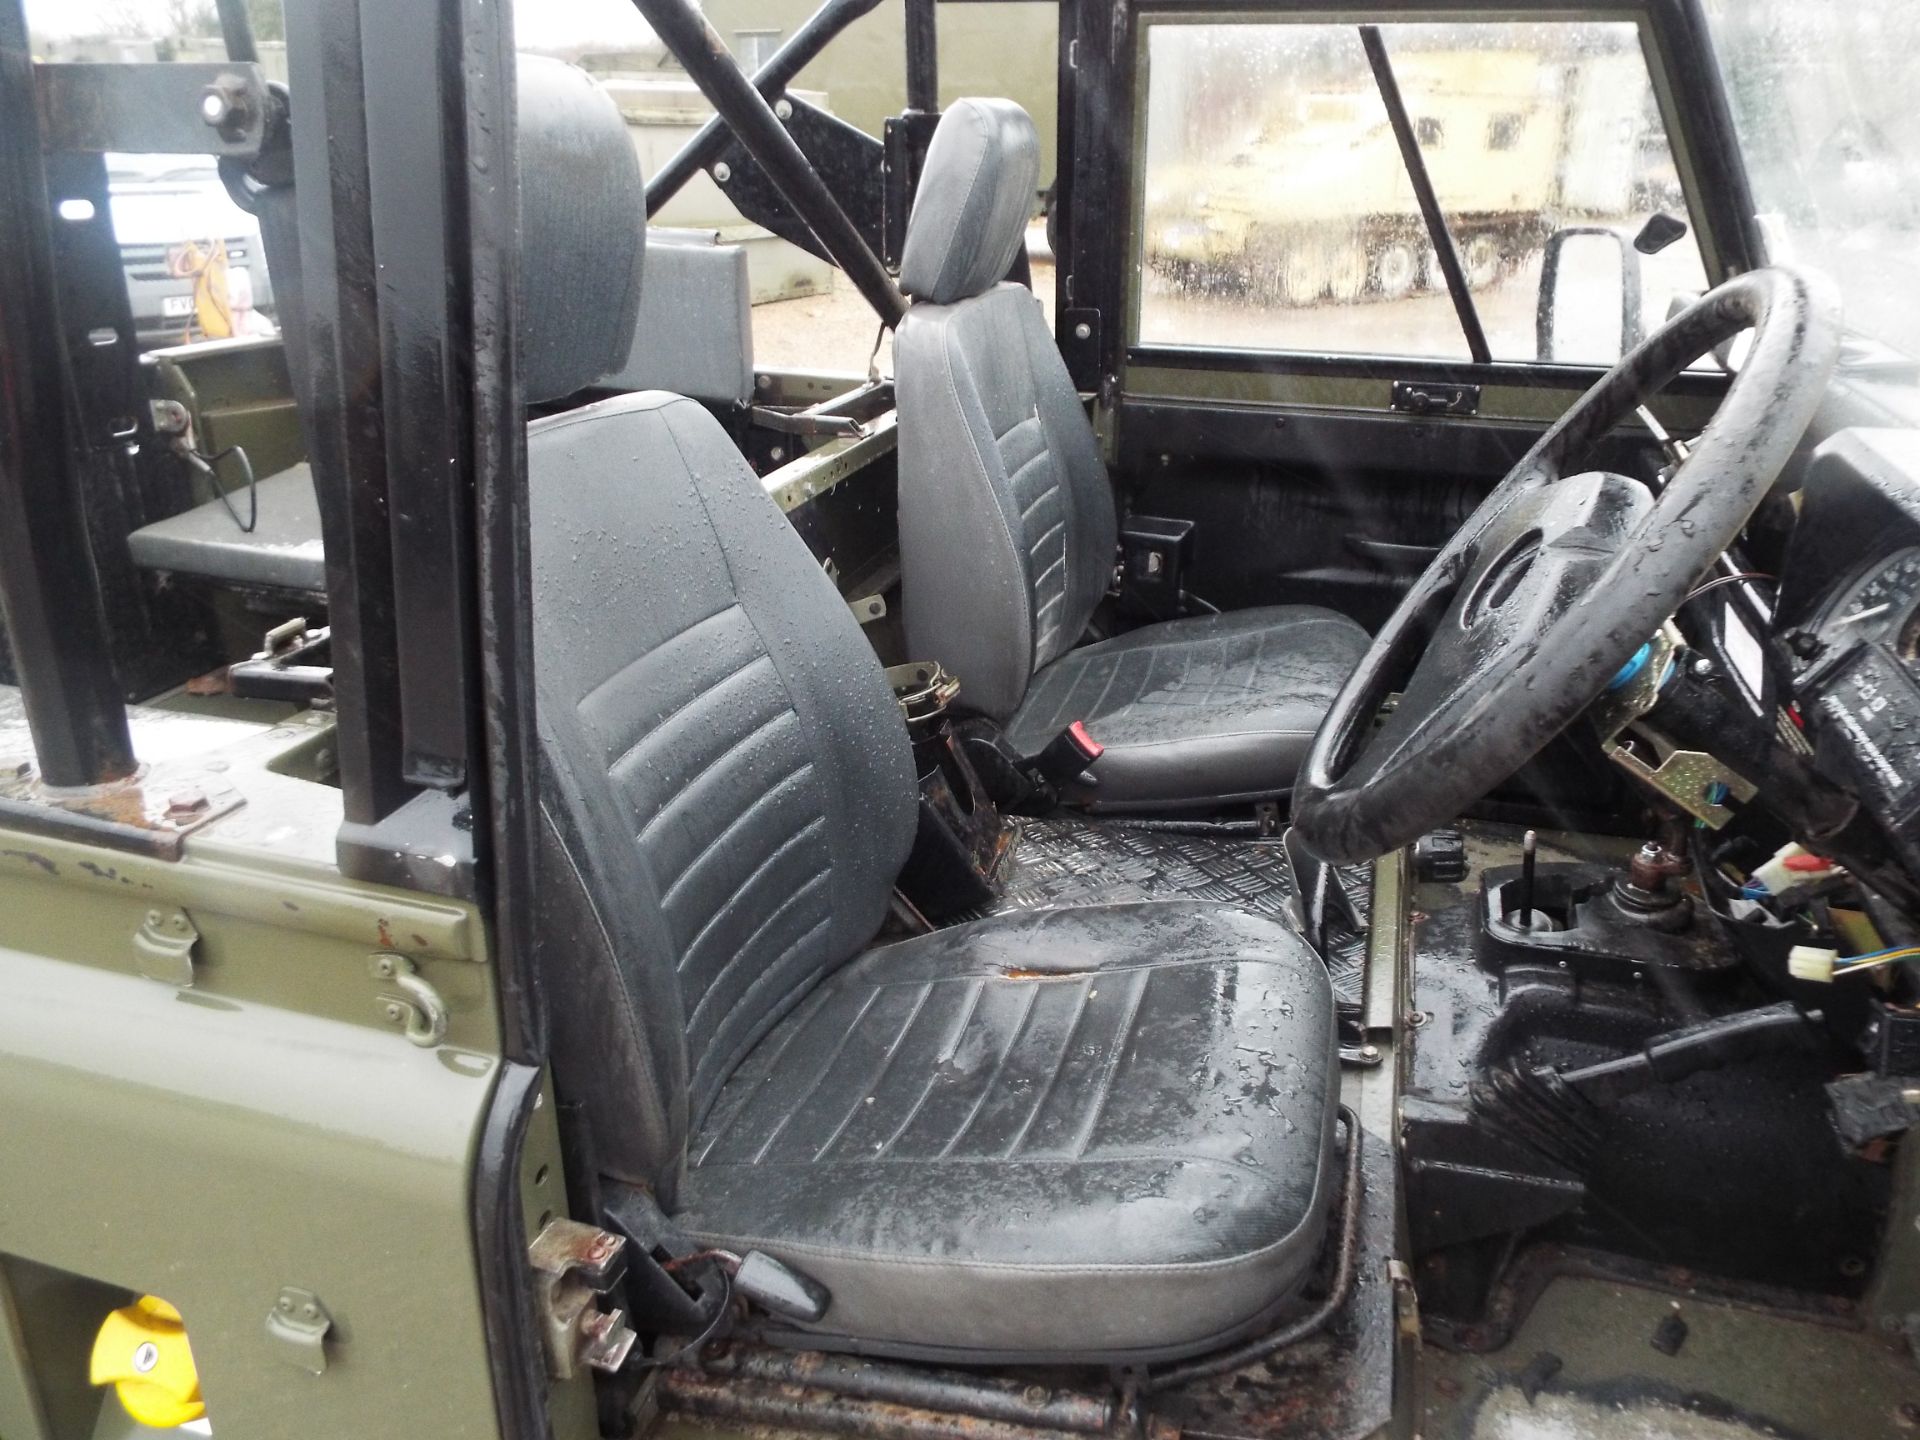 Military Specification Land Rover Wolf 90 Soft Top - Image 16 of 24